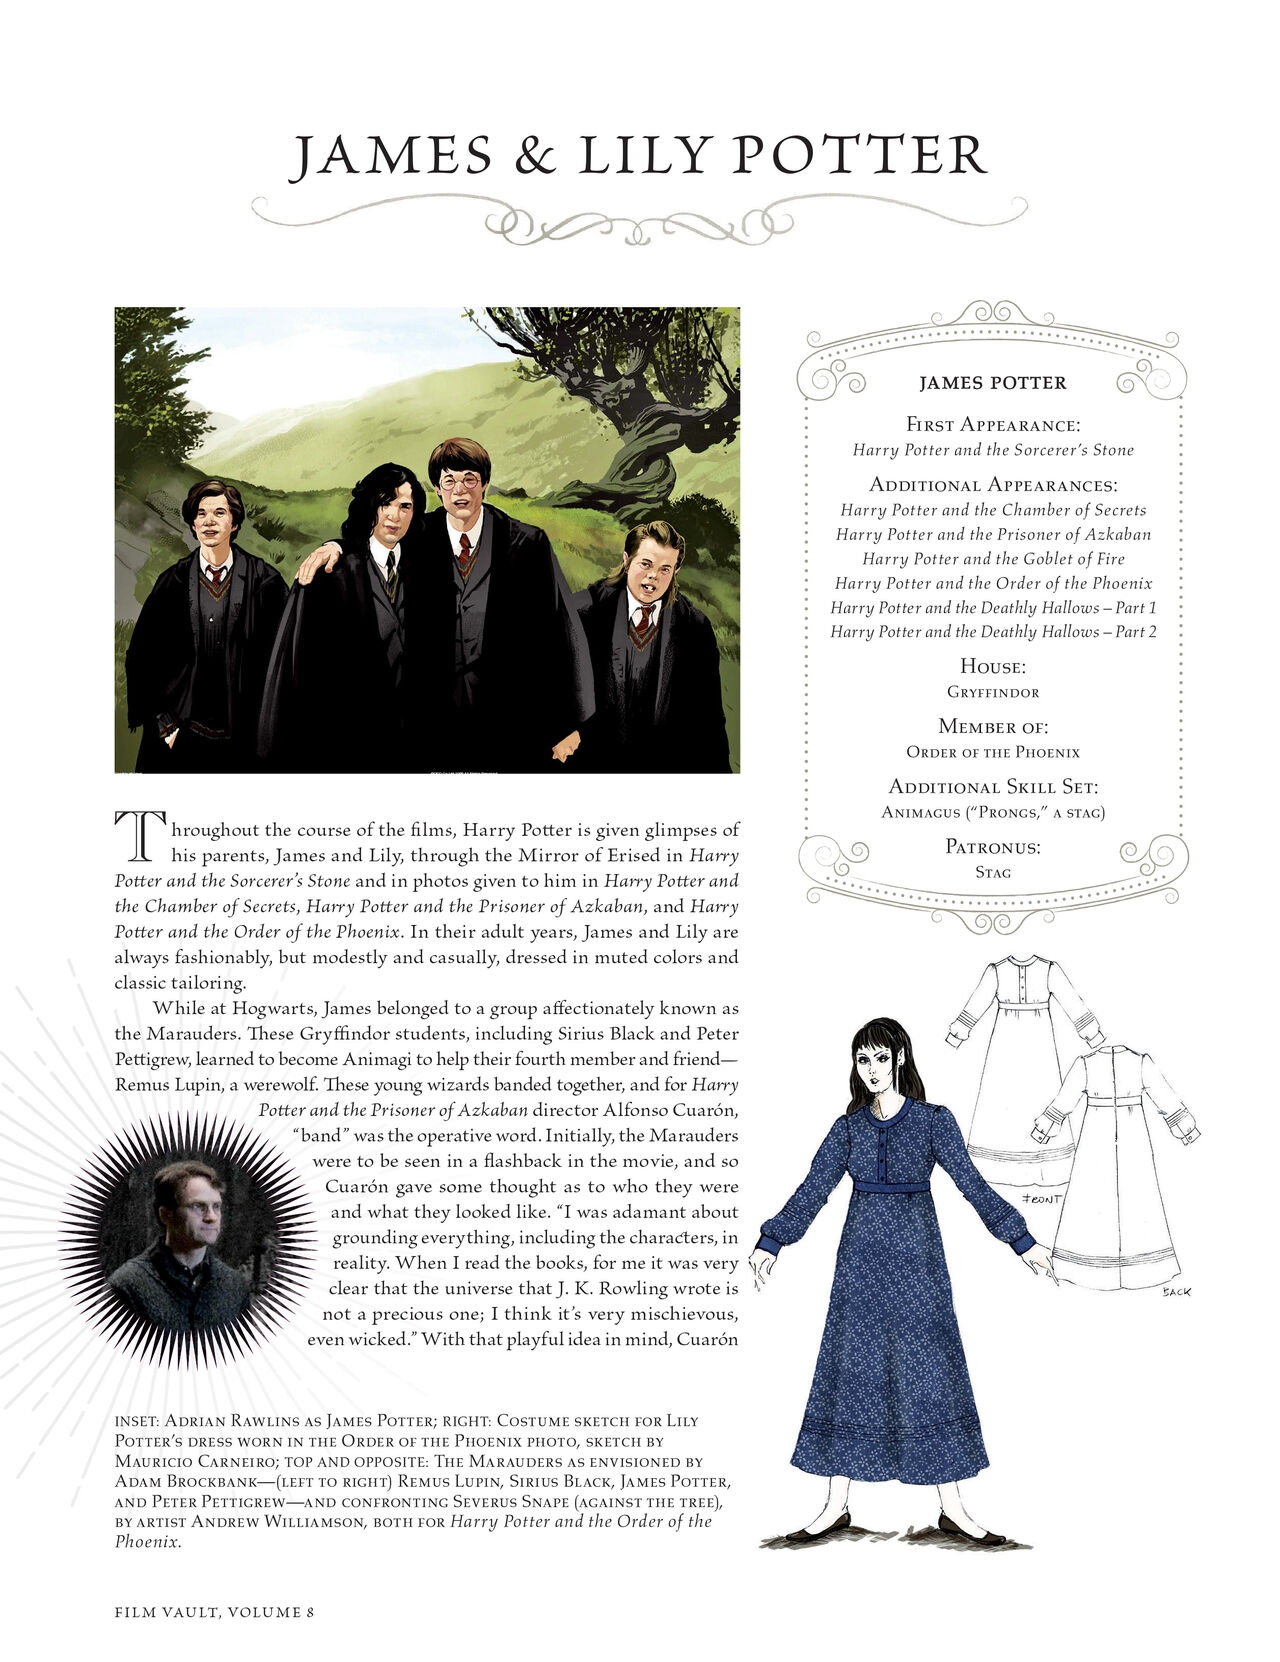 Harry Potter - Film Vault v08 - The Order of the Phoenix and Dark Forces 12